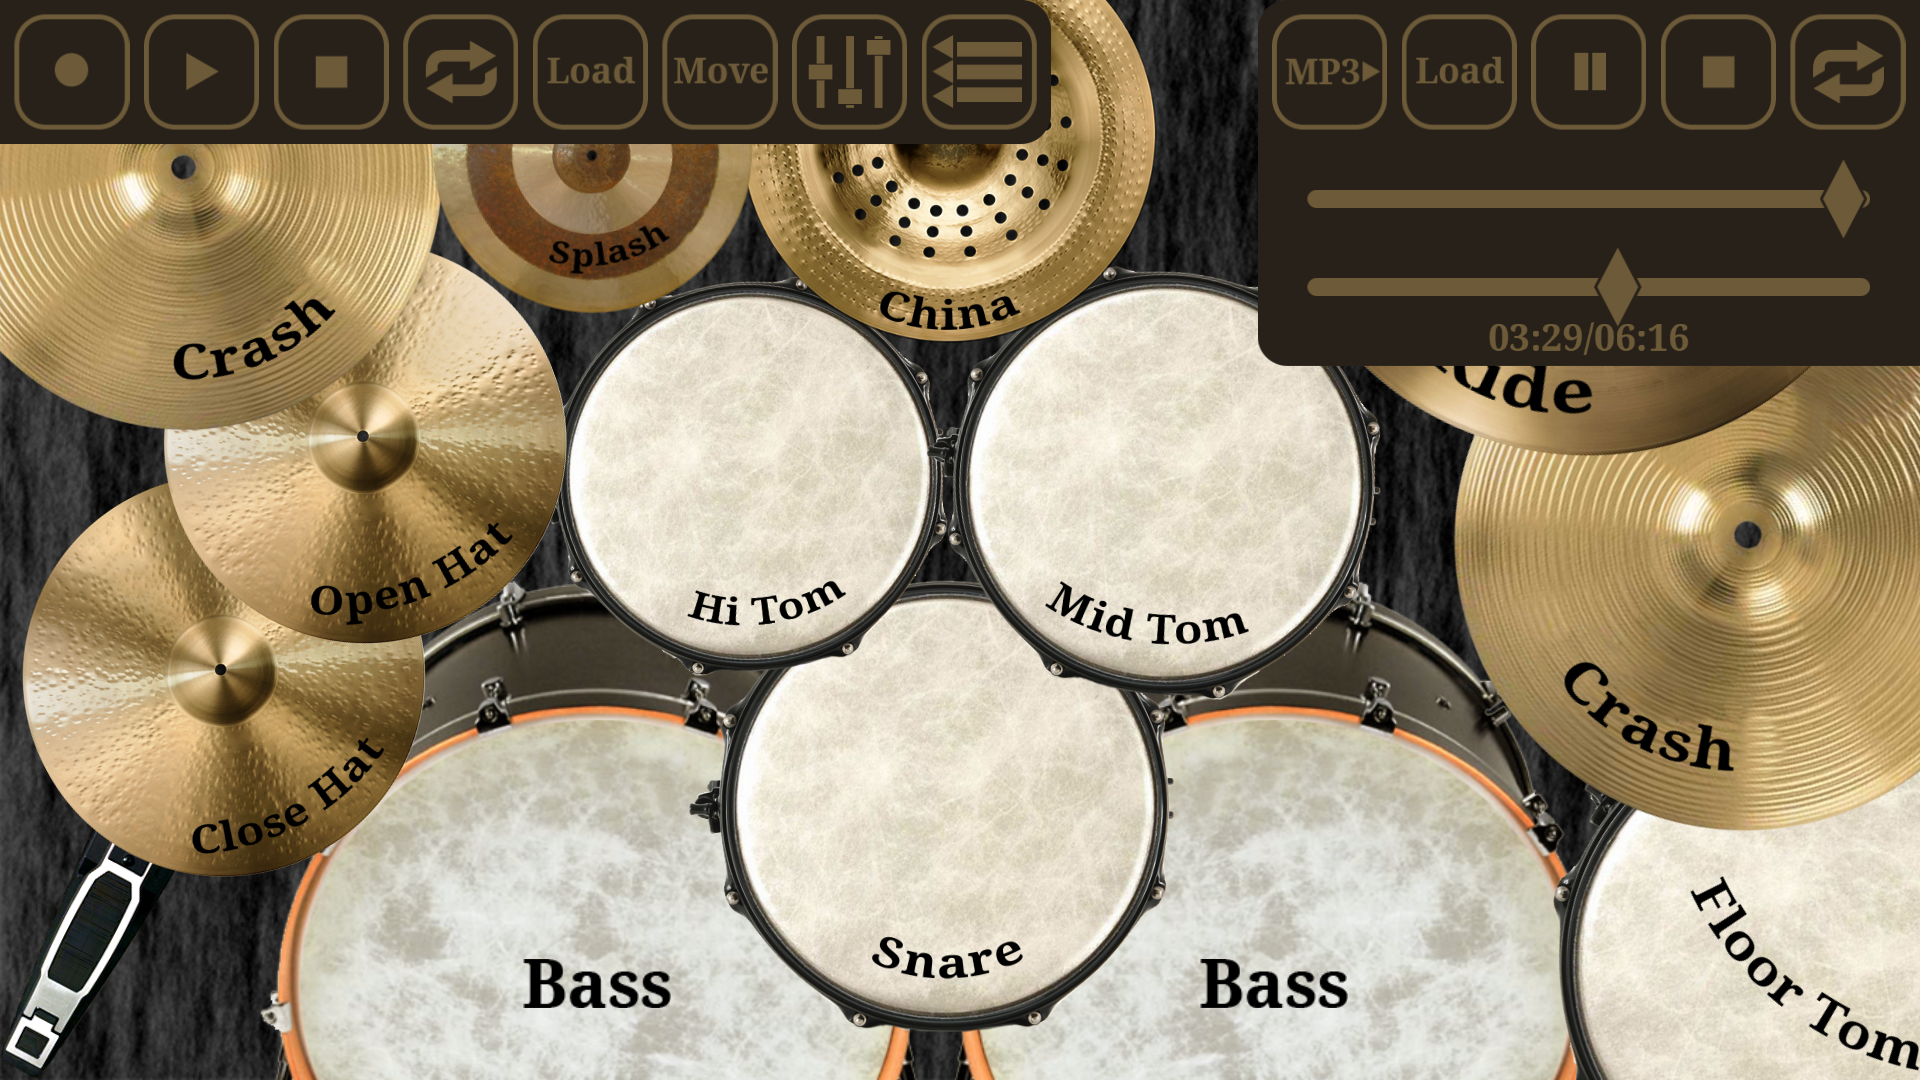 Android application Drum kit (Drums) free screenshort